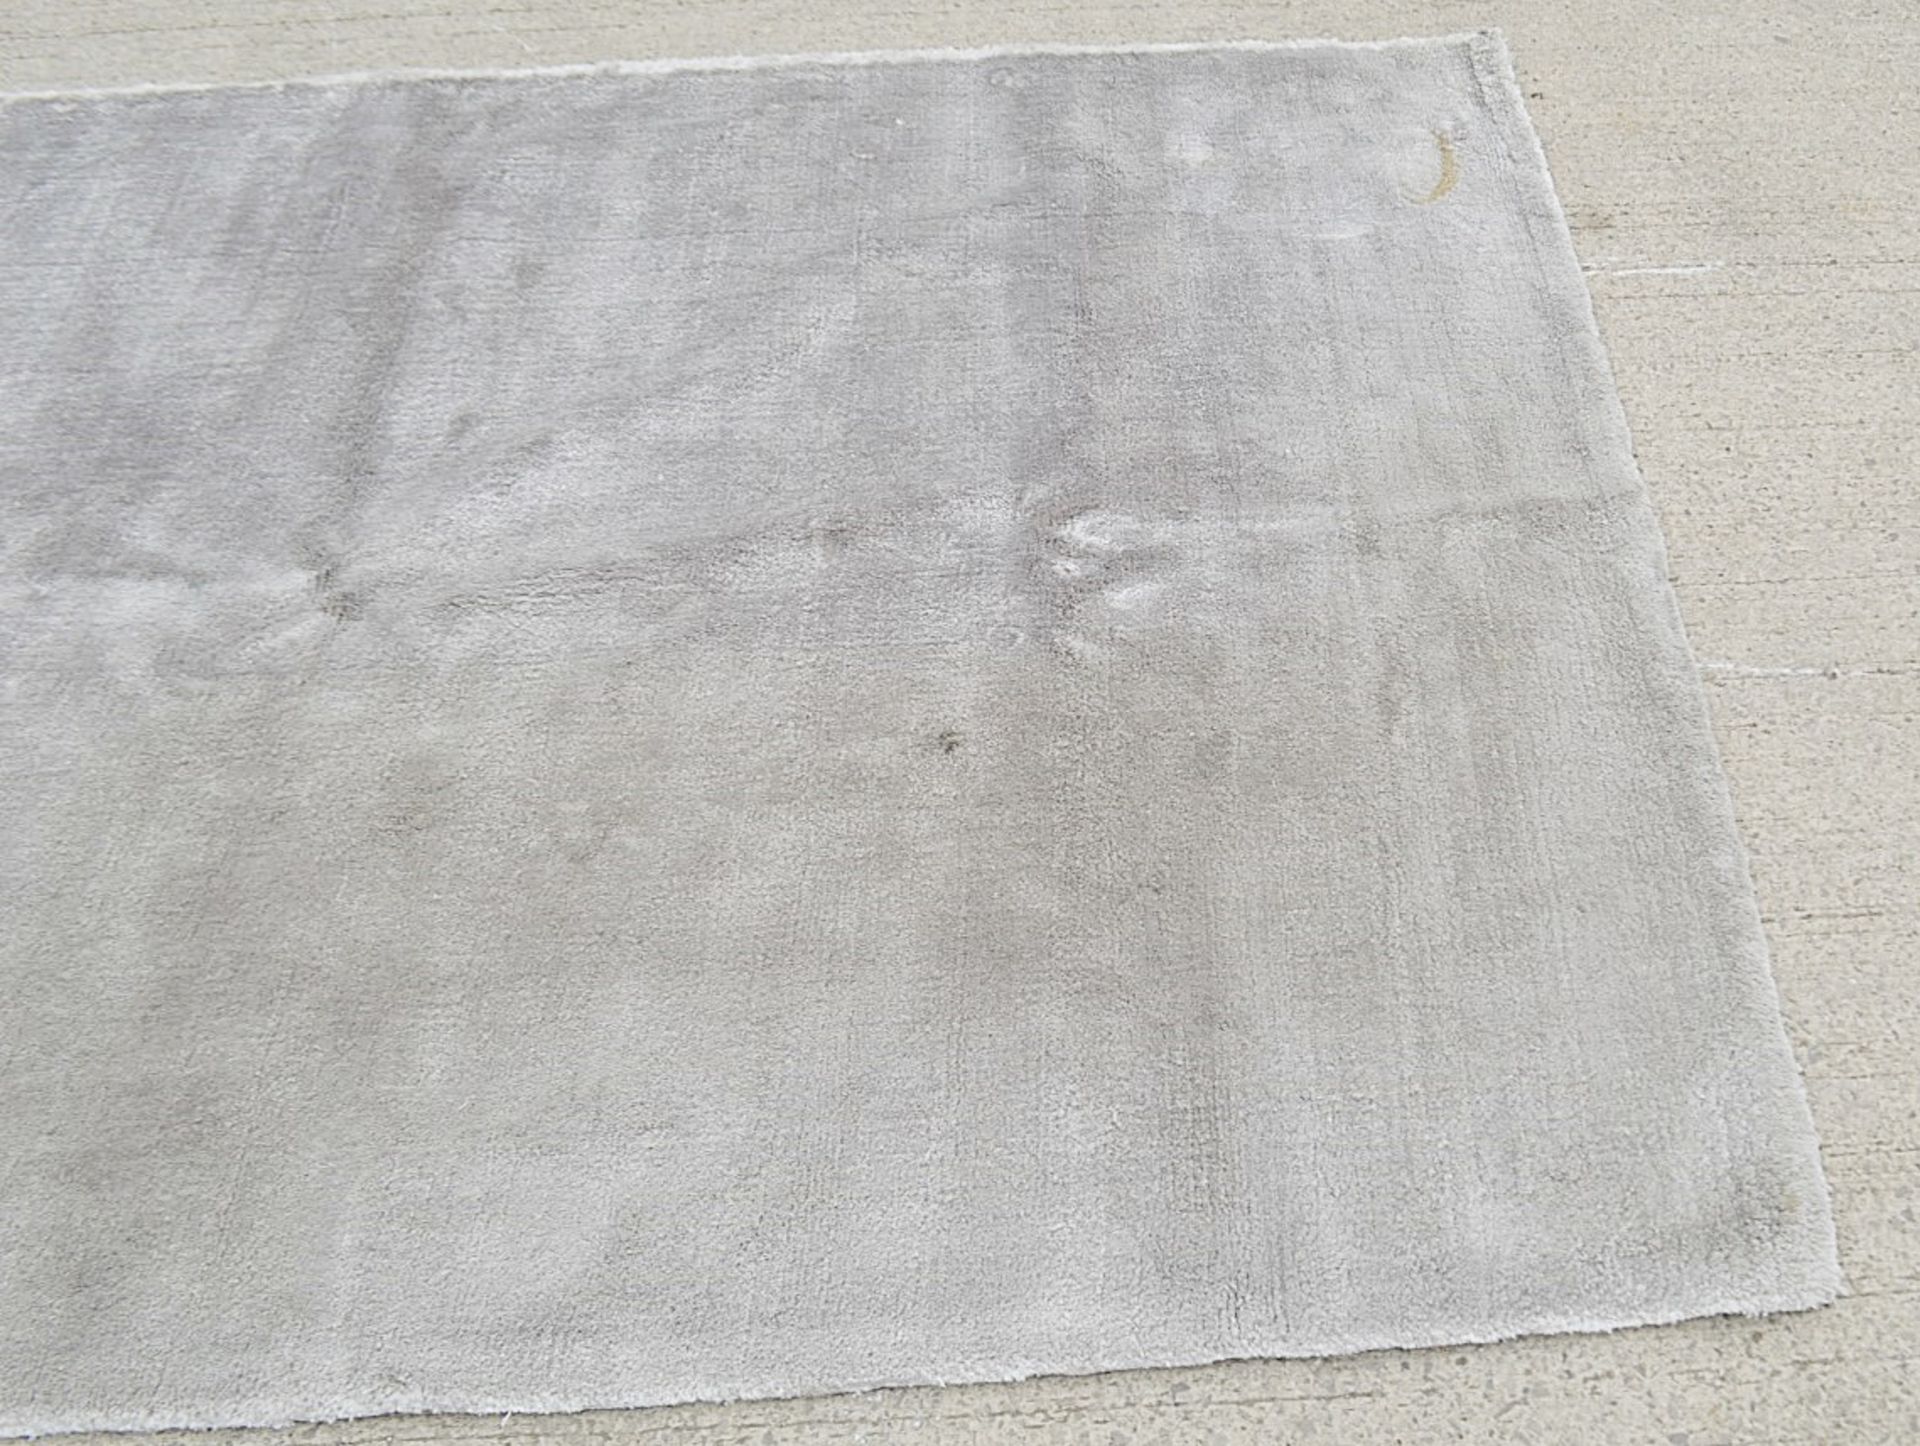 1 x Asiatic 'Dolce' Luxurious Rug in Silver - Dimensions (approx): 160x230cm - Ref: 6319128/ - Image 4 of 7